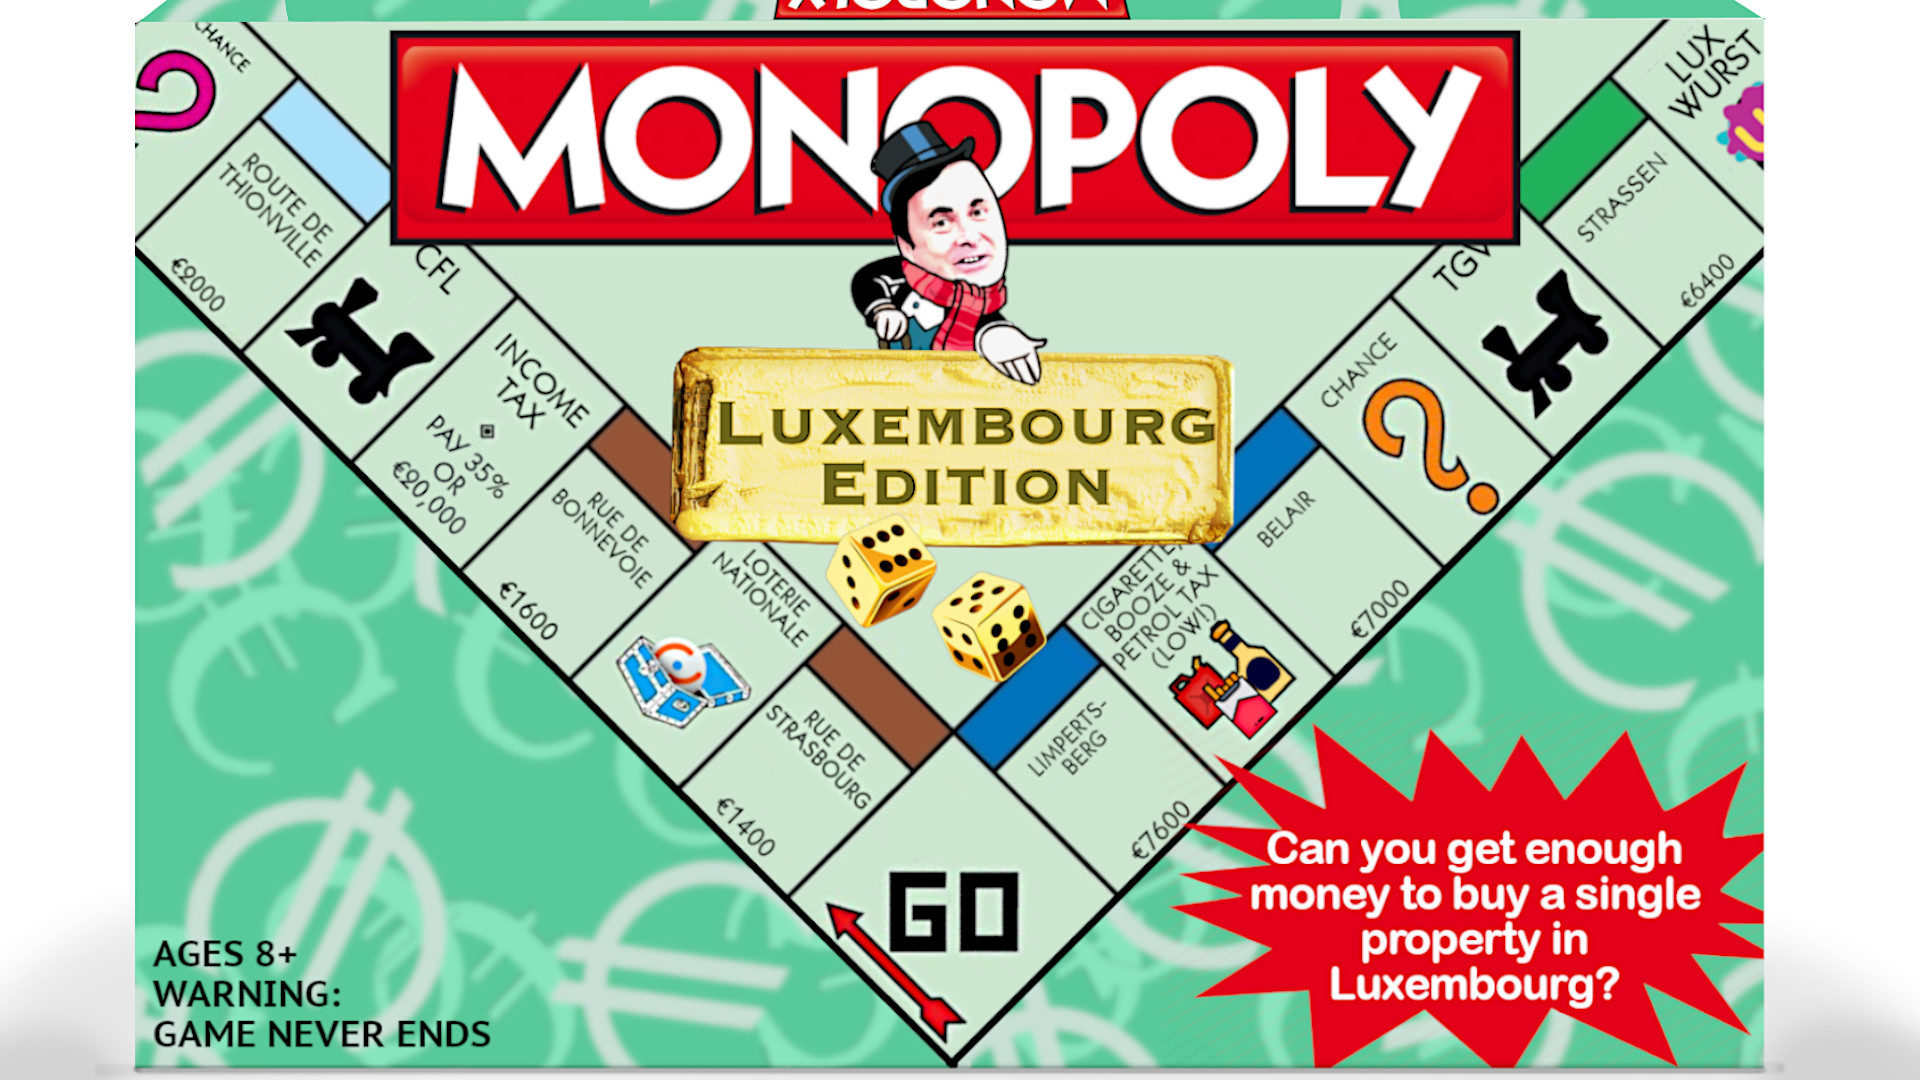 Monopoly Luxembourg version